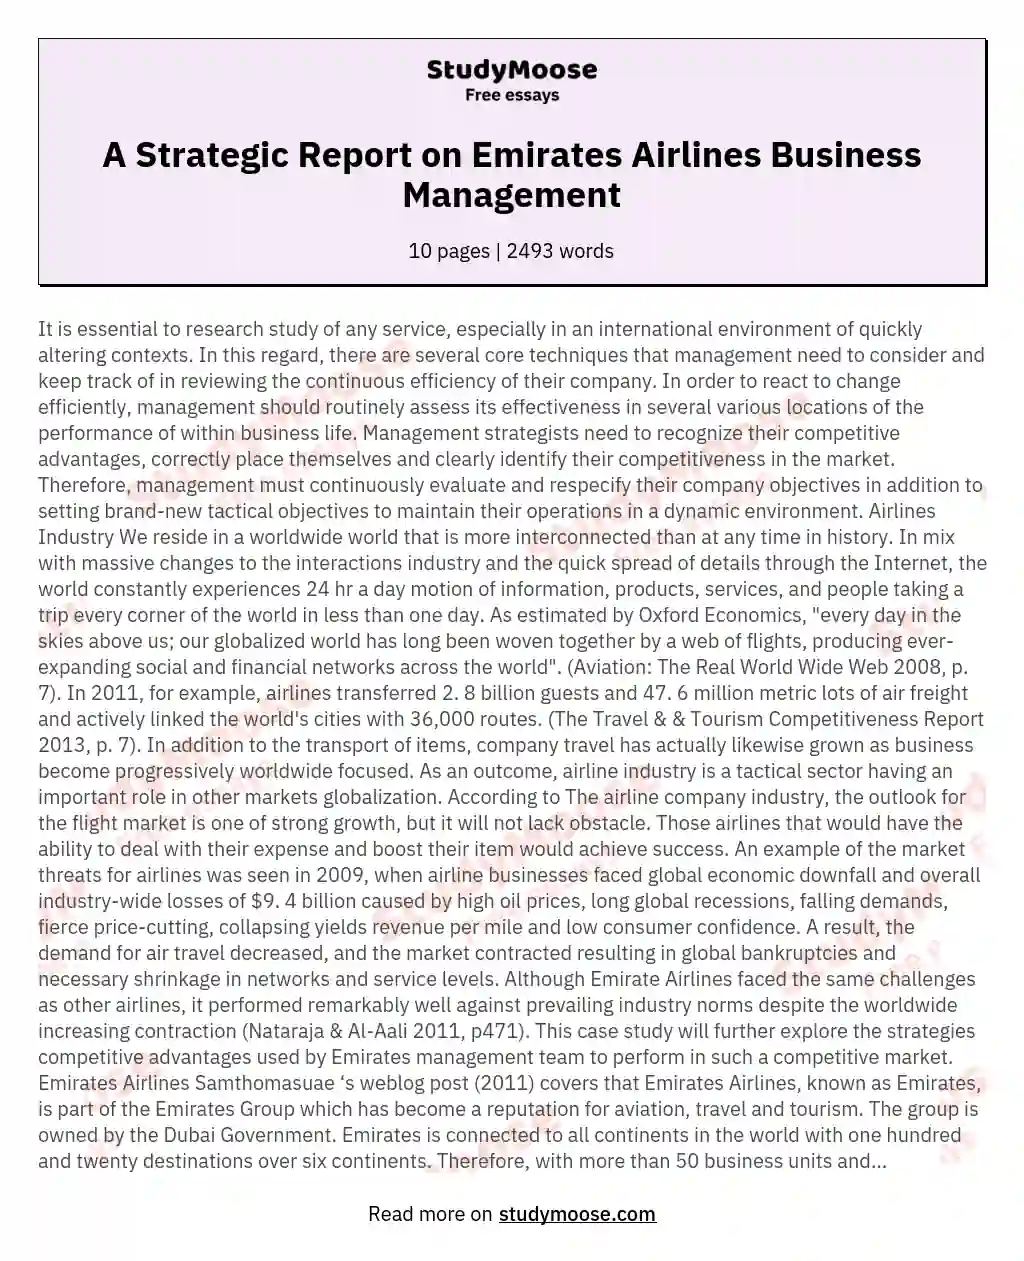 A Strategic Report on Emirates Airlines Business Management essay